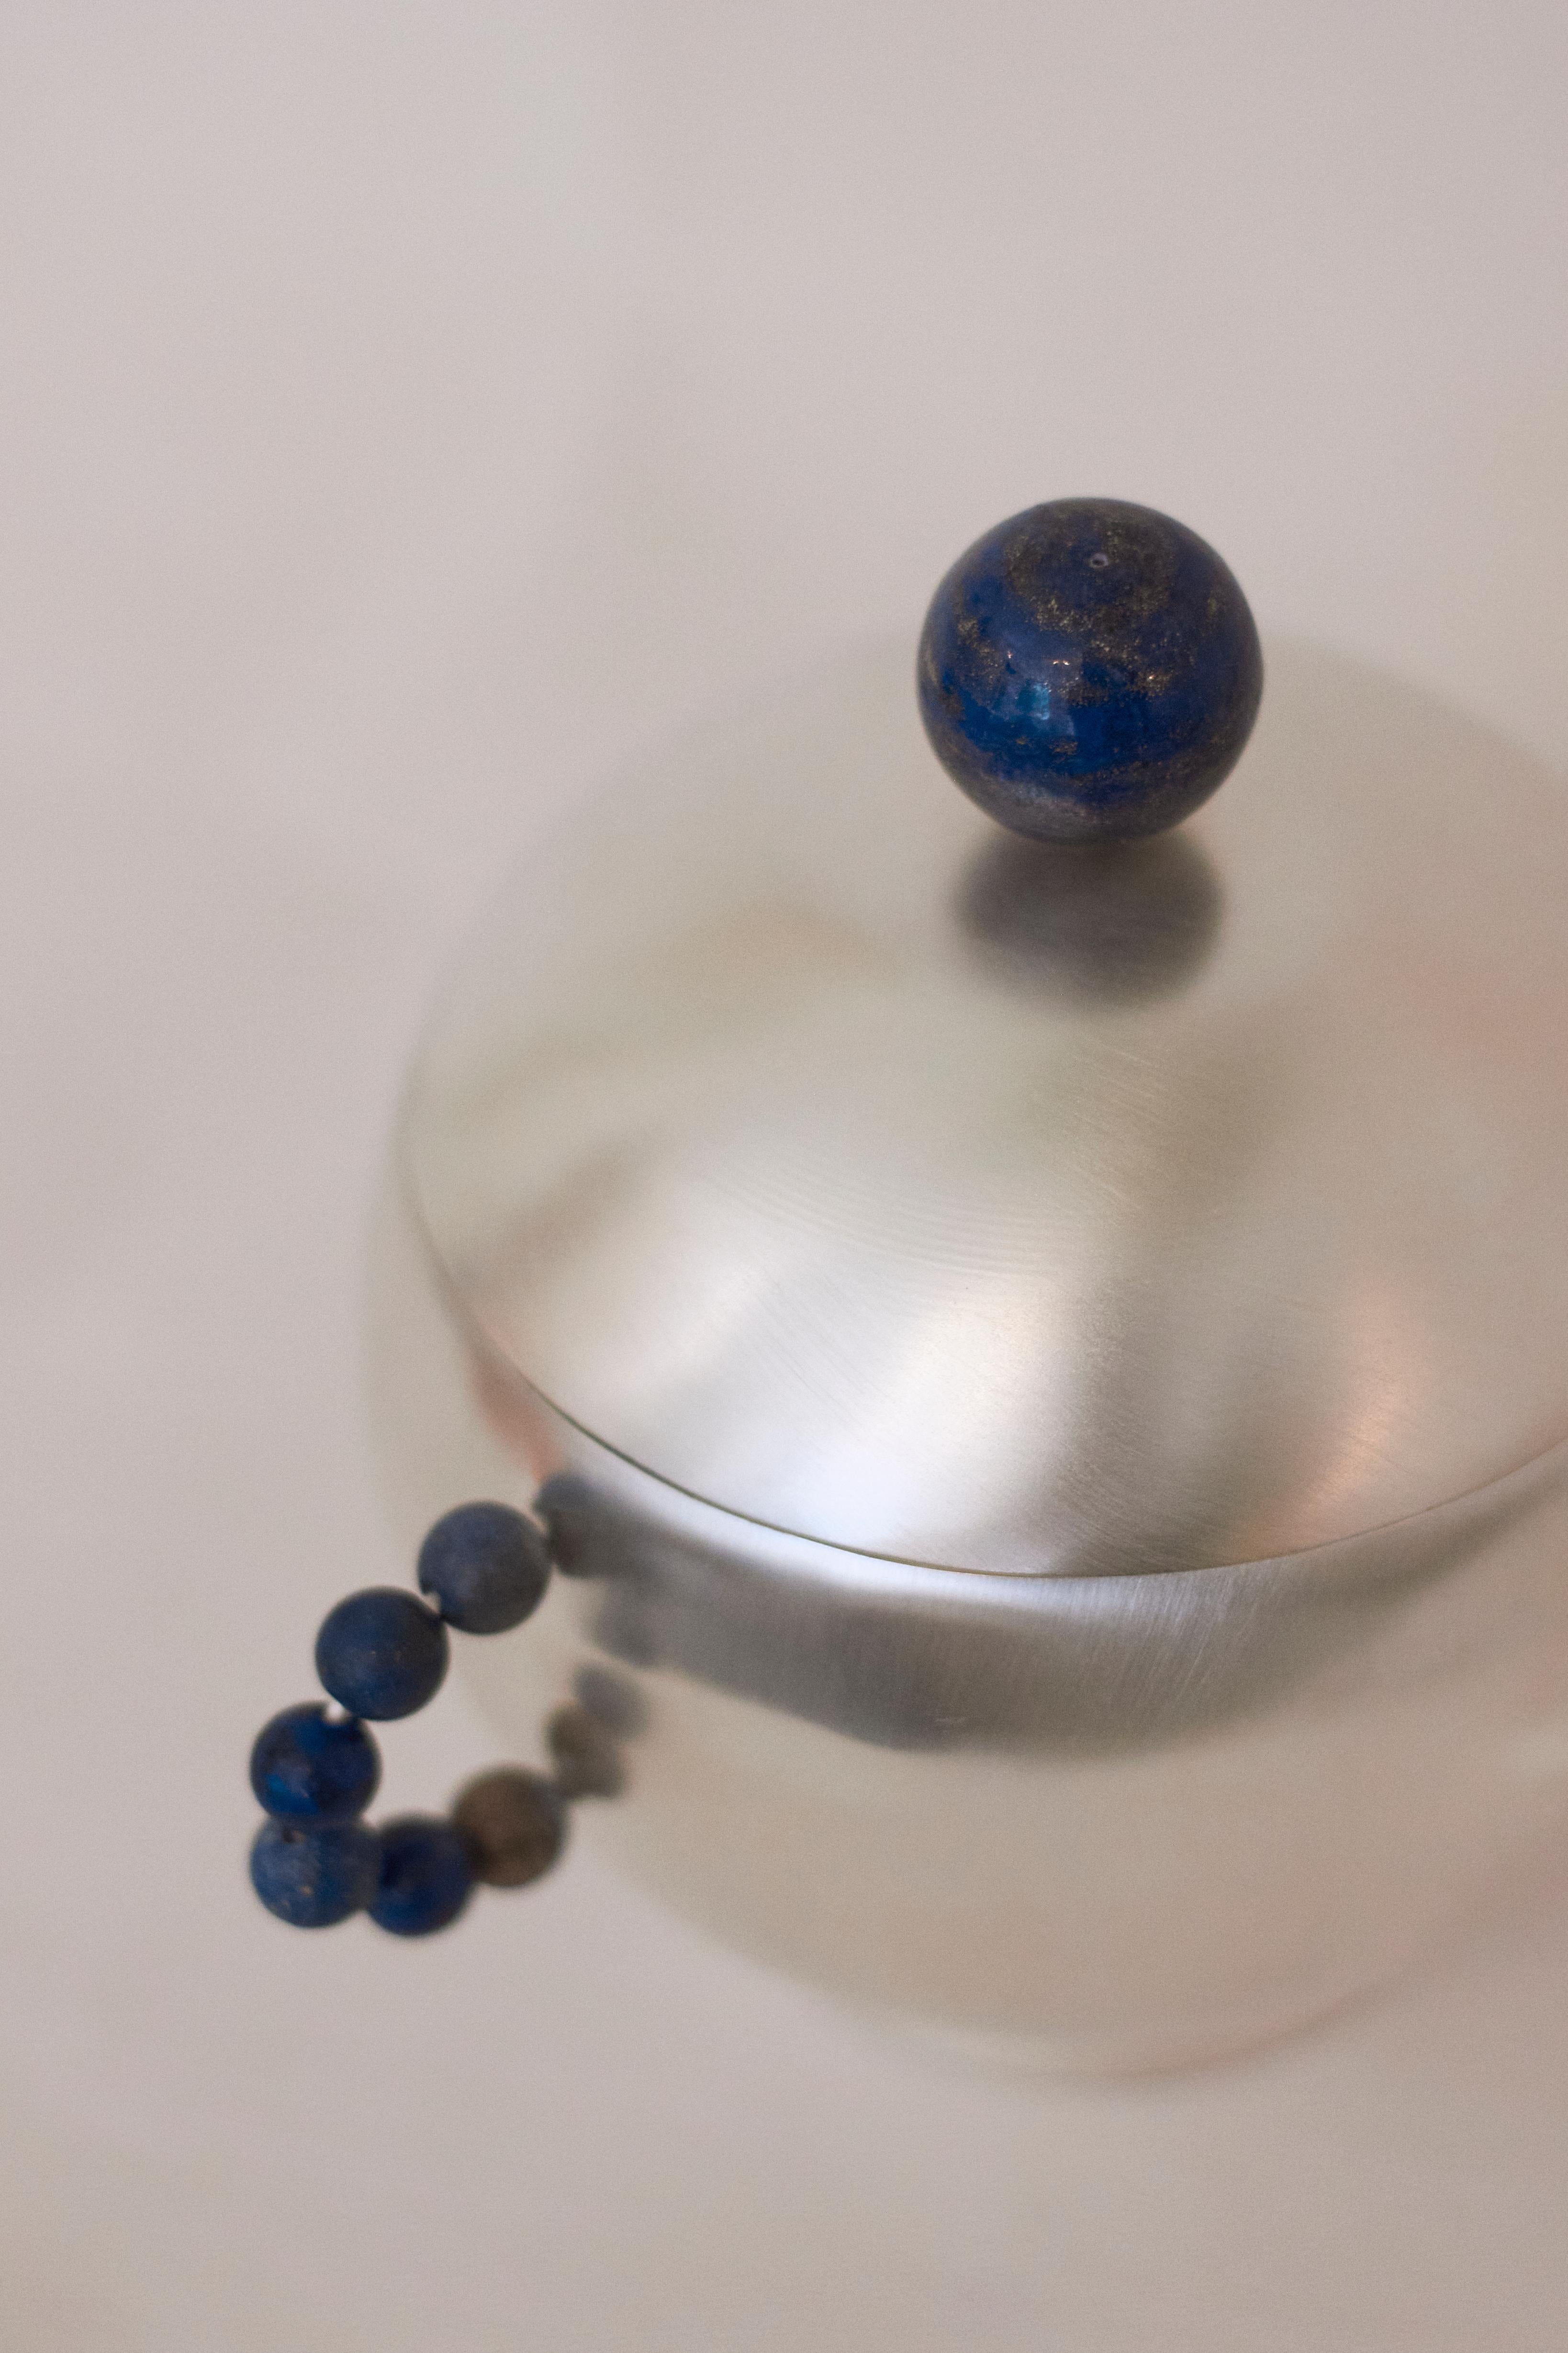 Elevate your dining experience with the sugar perlina, a plated brass container expertly crafted in Italy using sheet turning techniques.  The curved handles and top are adorned with lapis lazuli stones, adding a touch of jewelry inspired